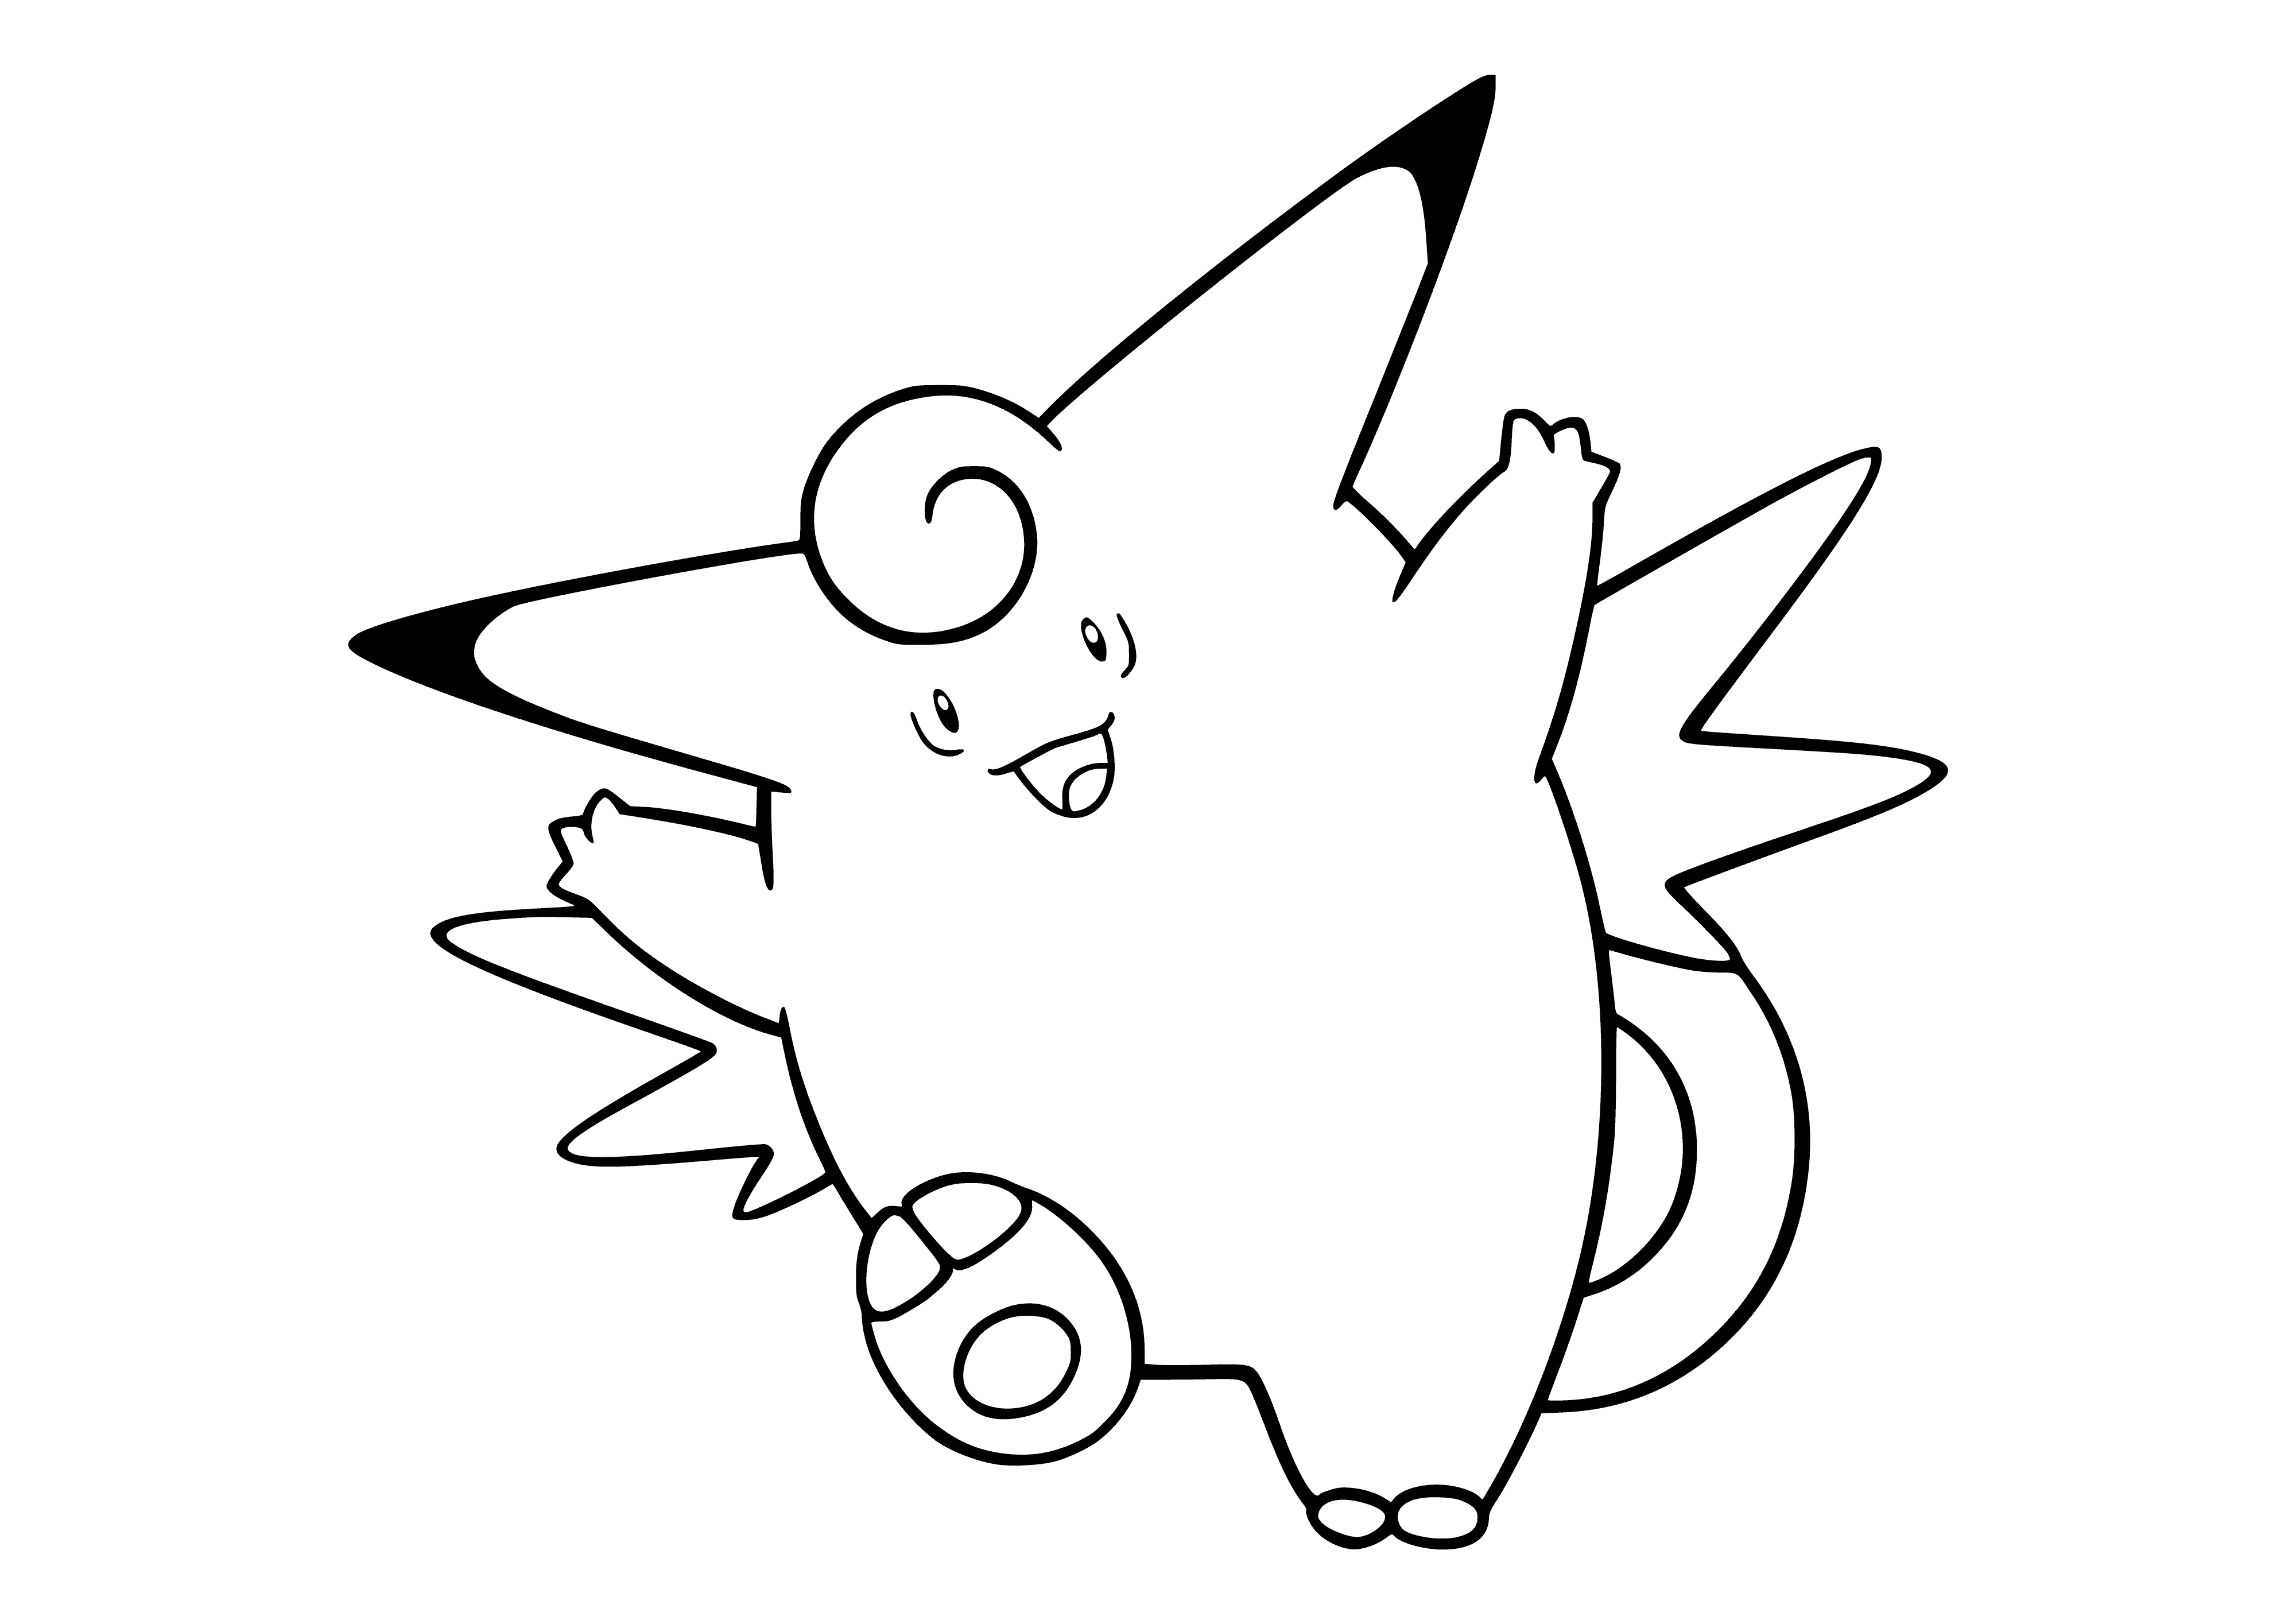 coloring page: Pink Pokémon with white ruff, black nose, oval eyes, white balls on head, four wings, and long, fluffy tail.